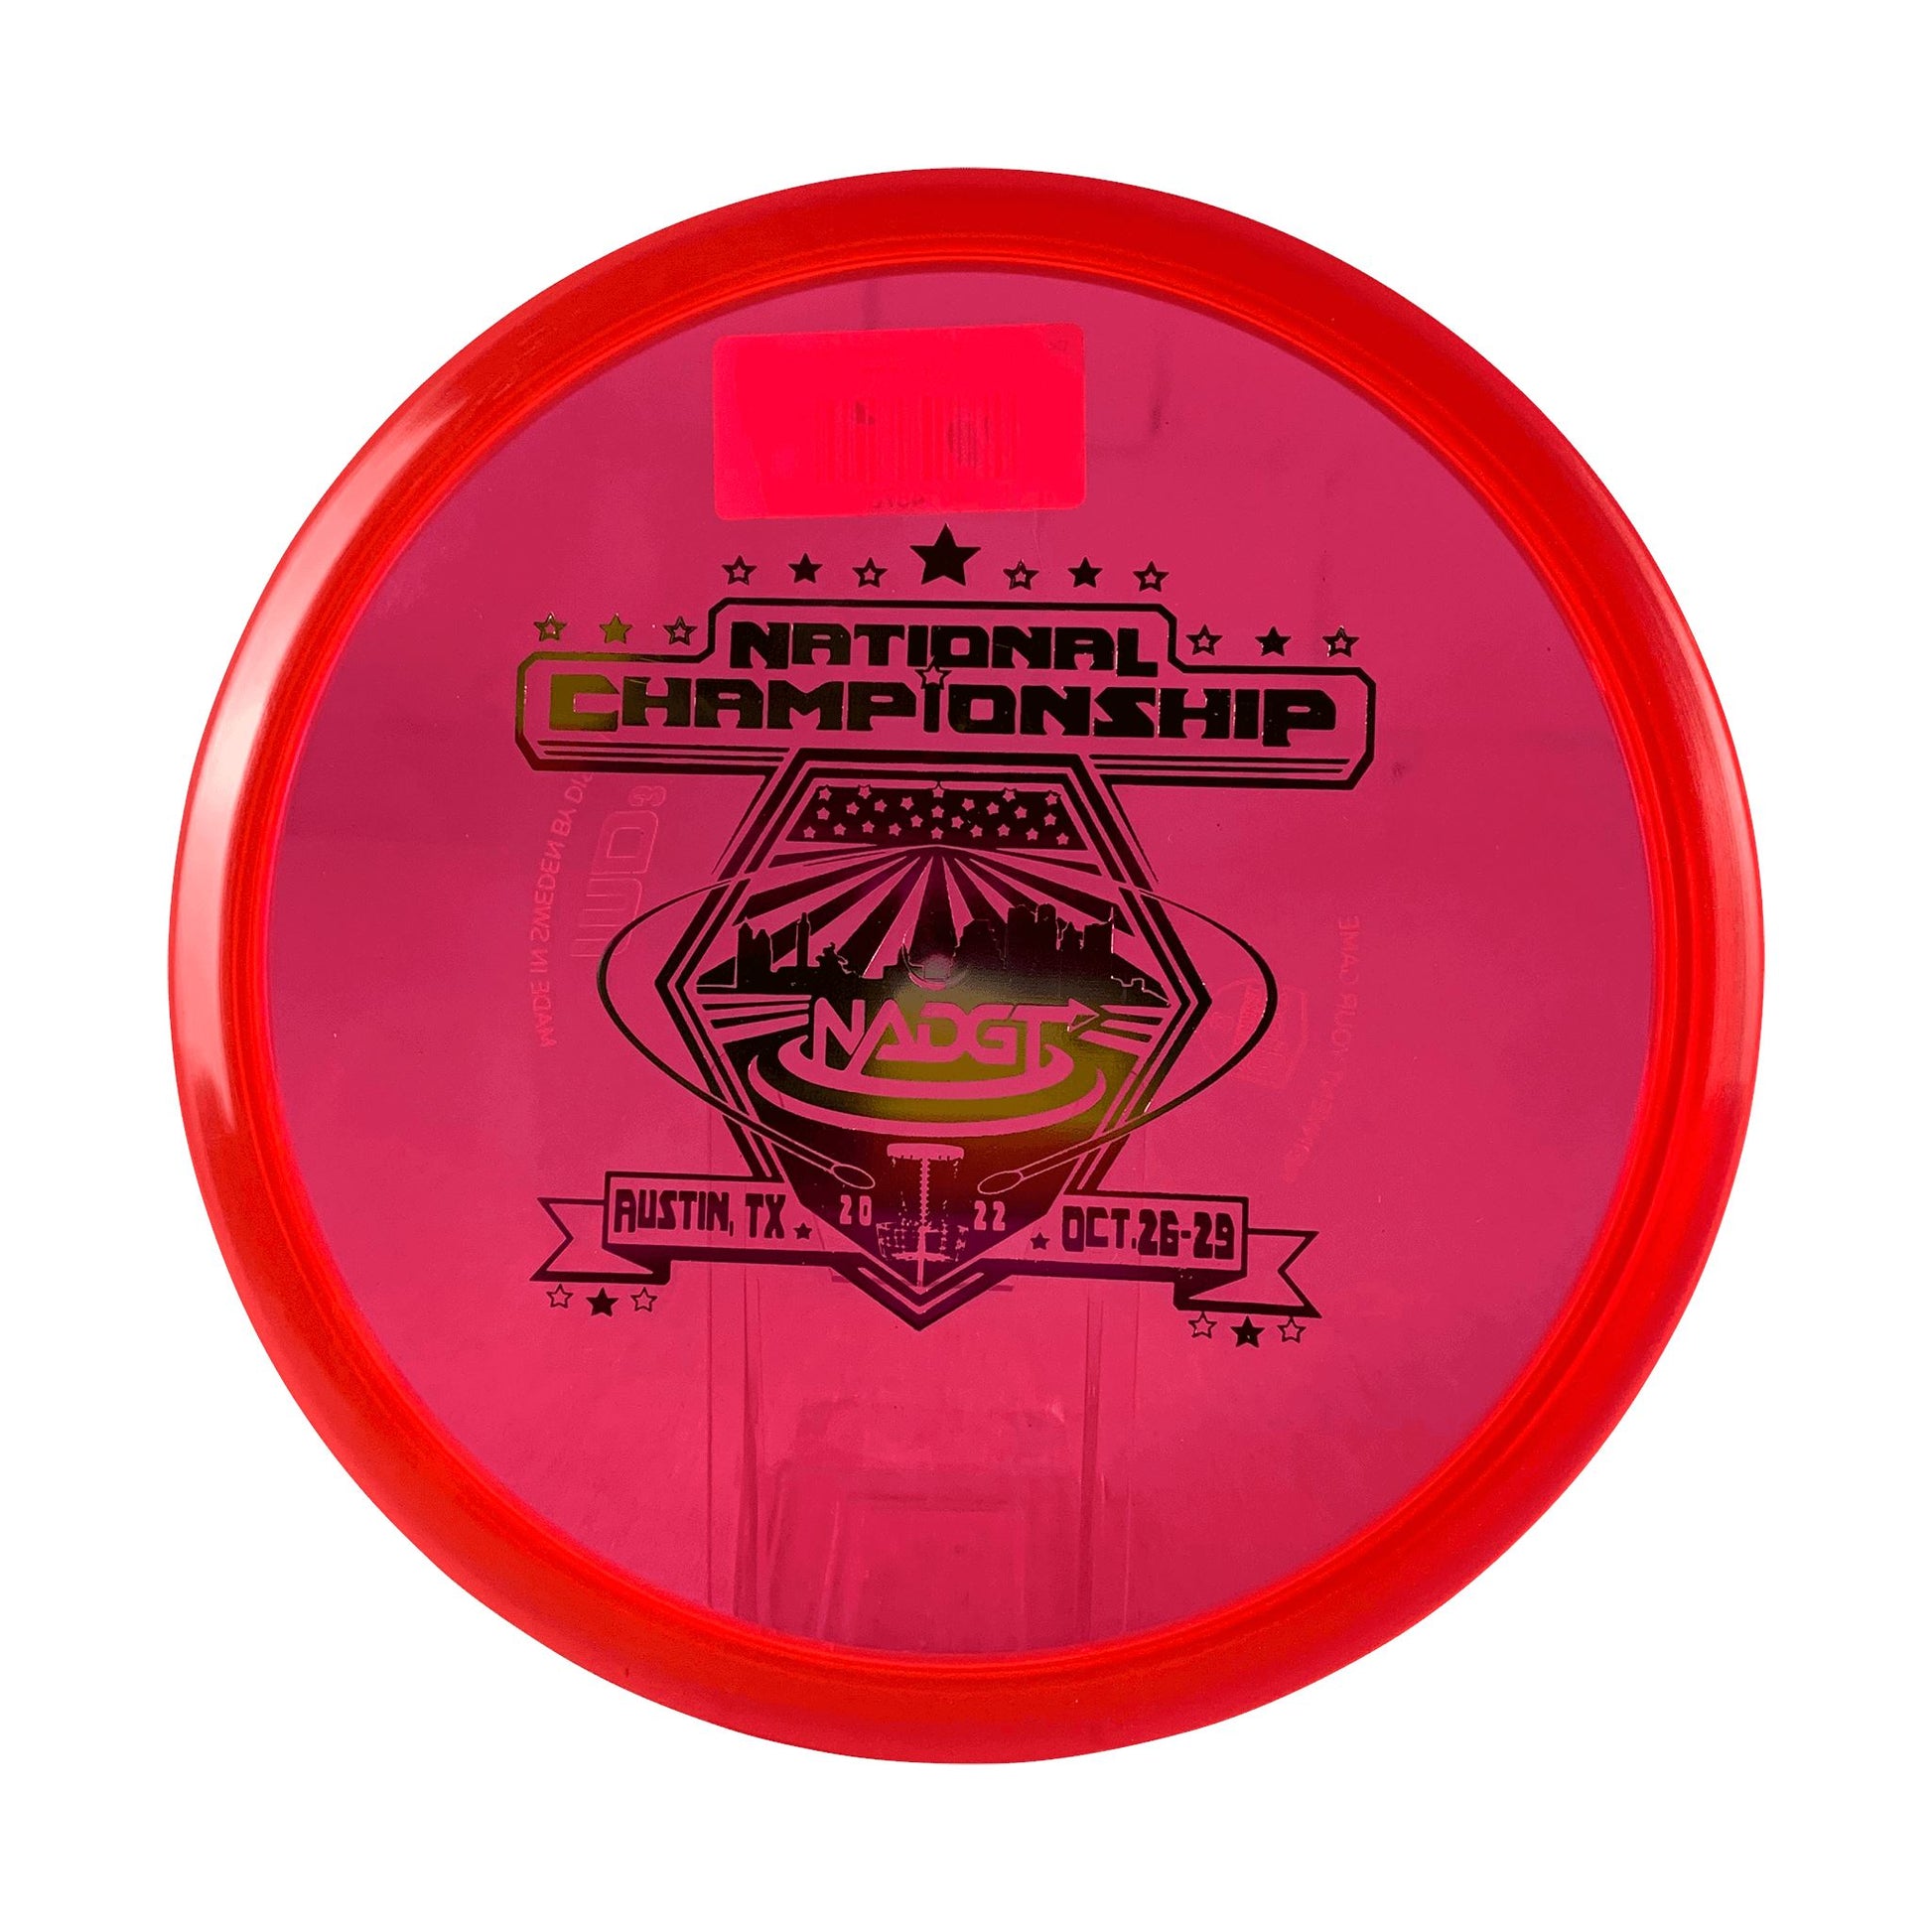 C-Line MD3 - NADGT National Championship 2022 Disc Discmania red 180 